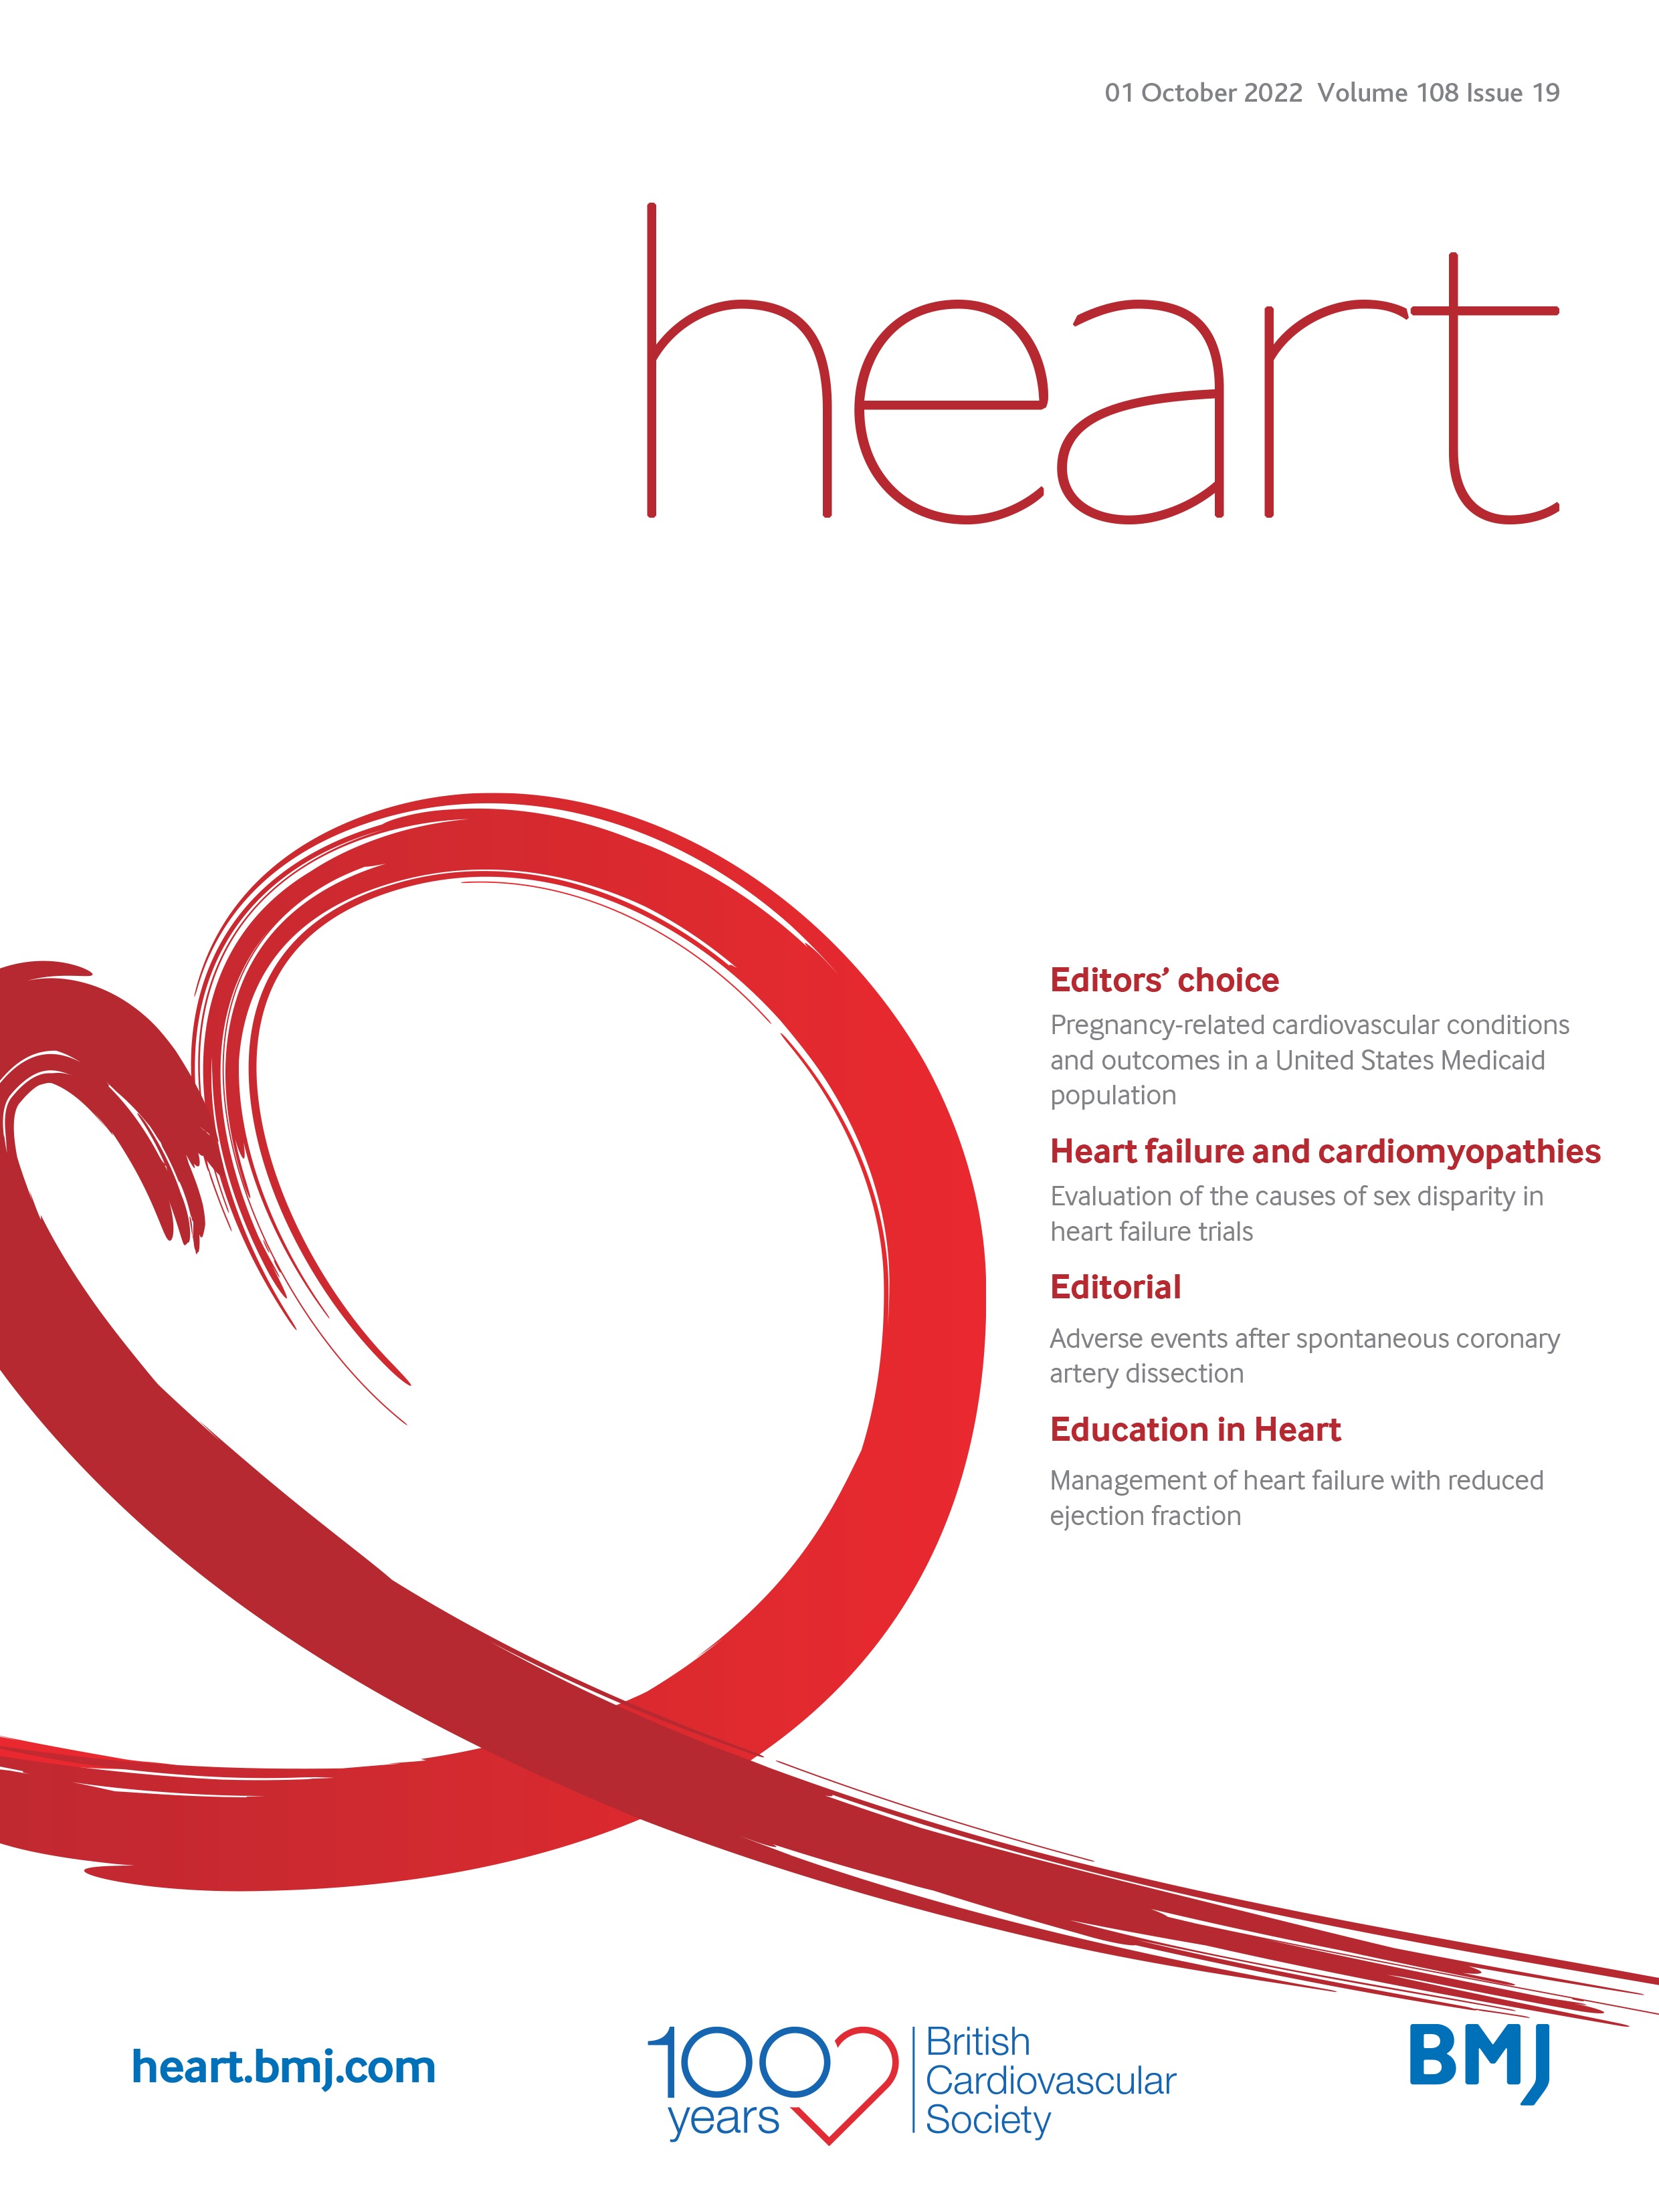 Management of heart failure with reduced ejection fraction